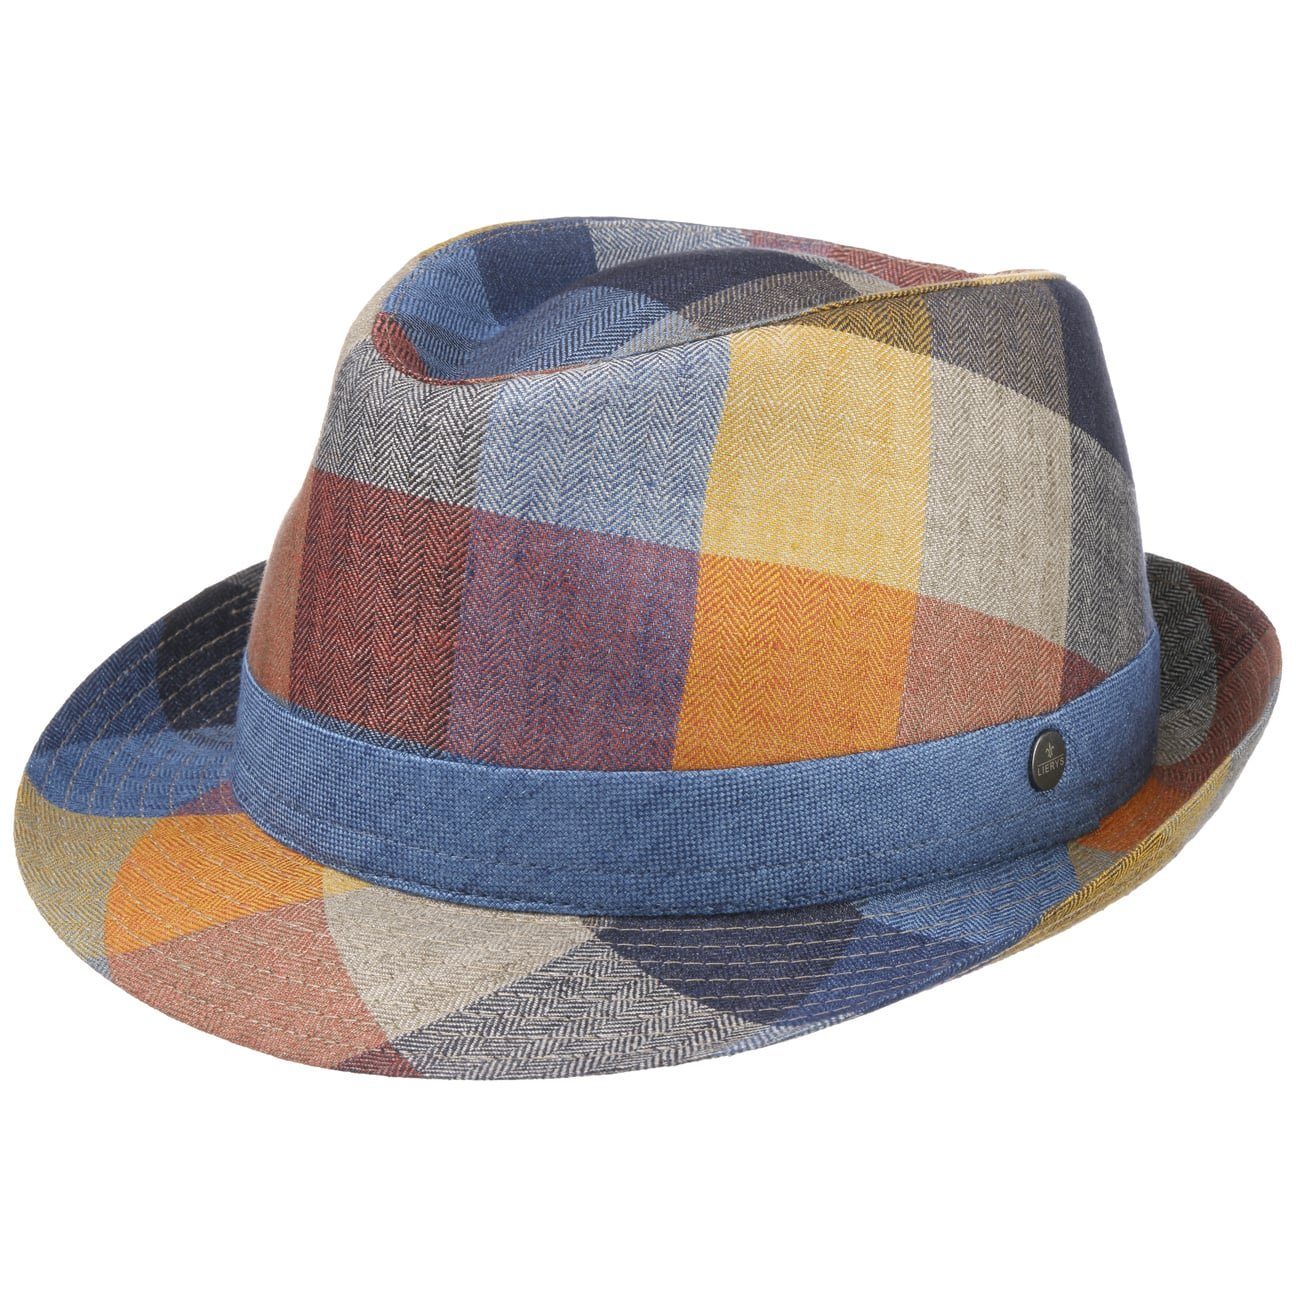 Lierys Trilby (1-St) Trilby mit Futter, Made in Italy bunt